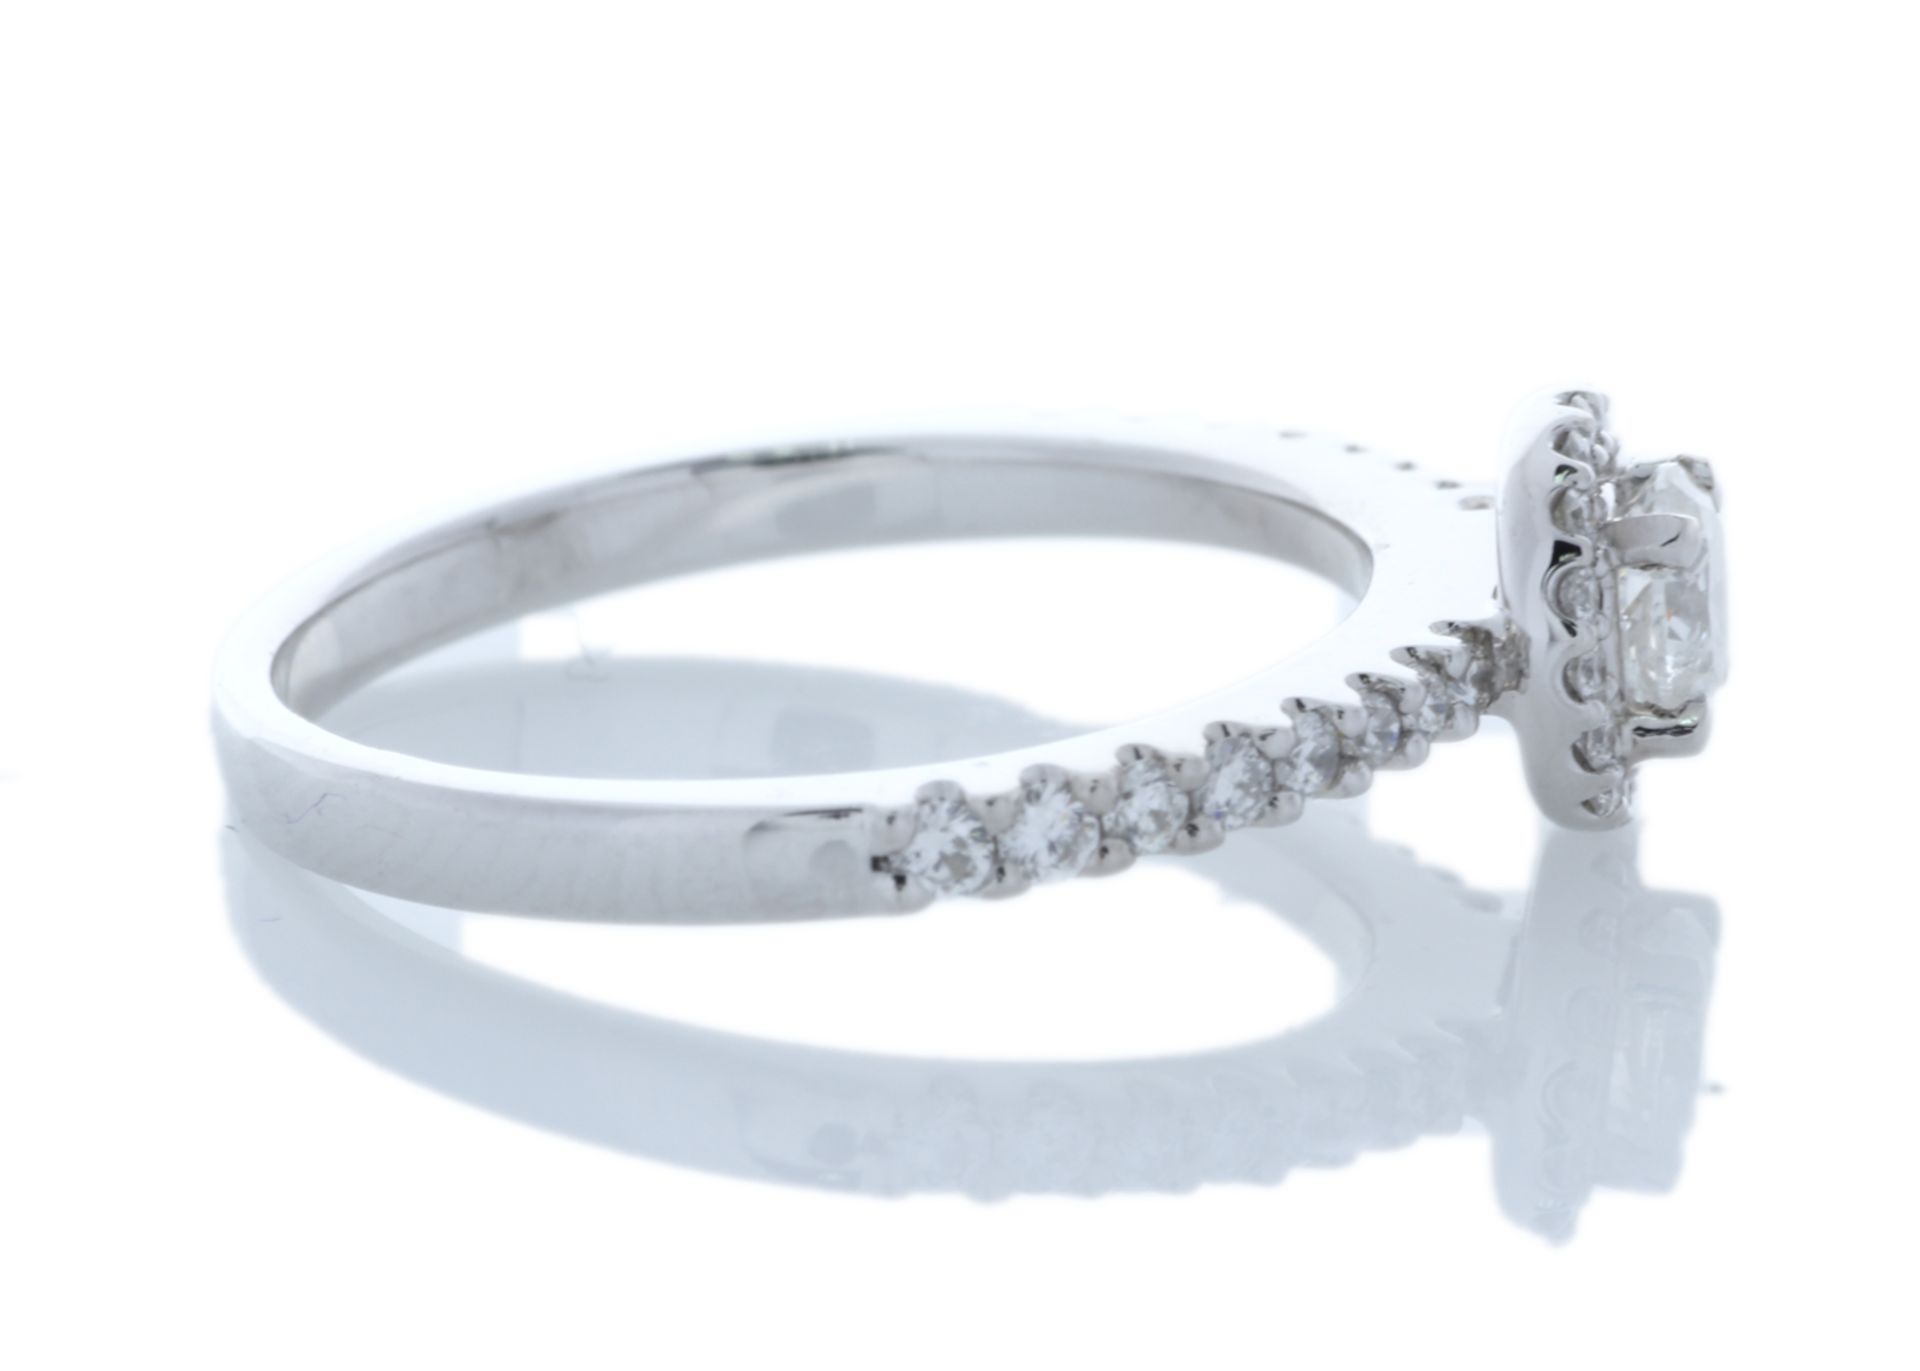 18ct White Gold Single Stone With Halo Setting Ring (0.31) 0.63 Carats - Valued By GIE £6,430.00 - - Image 4 of 5